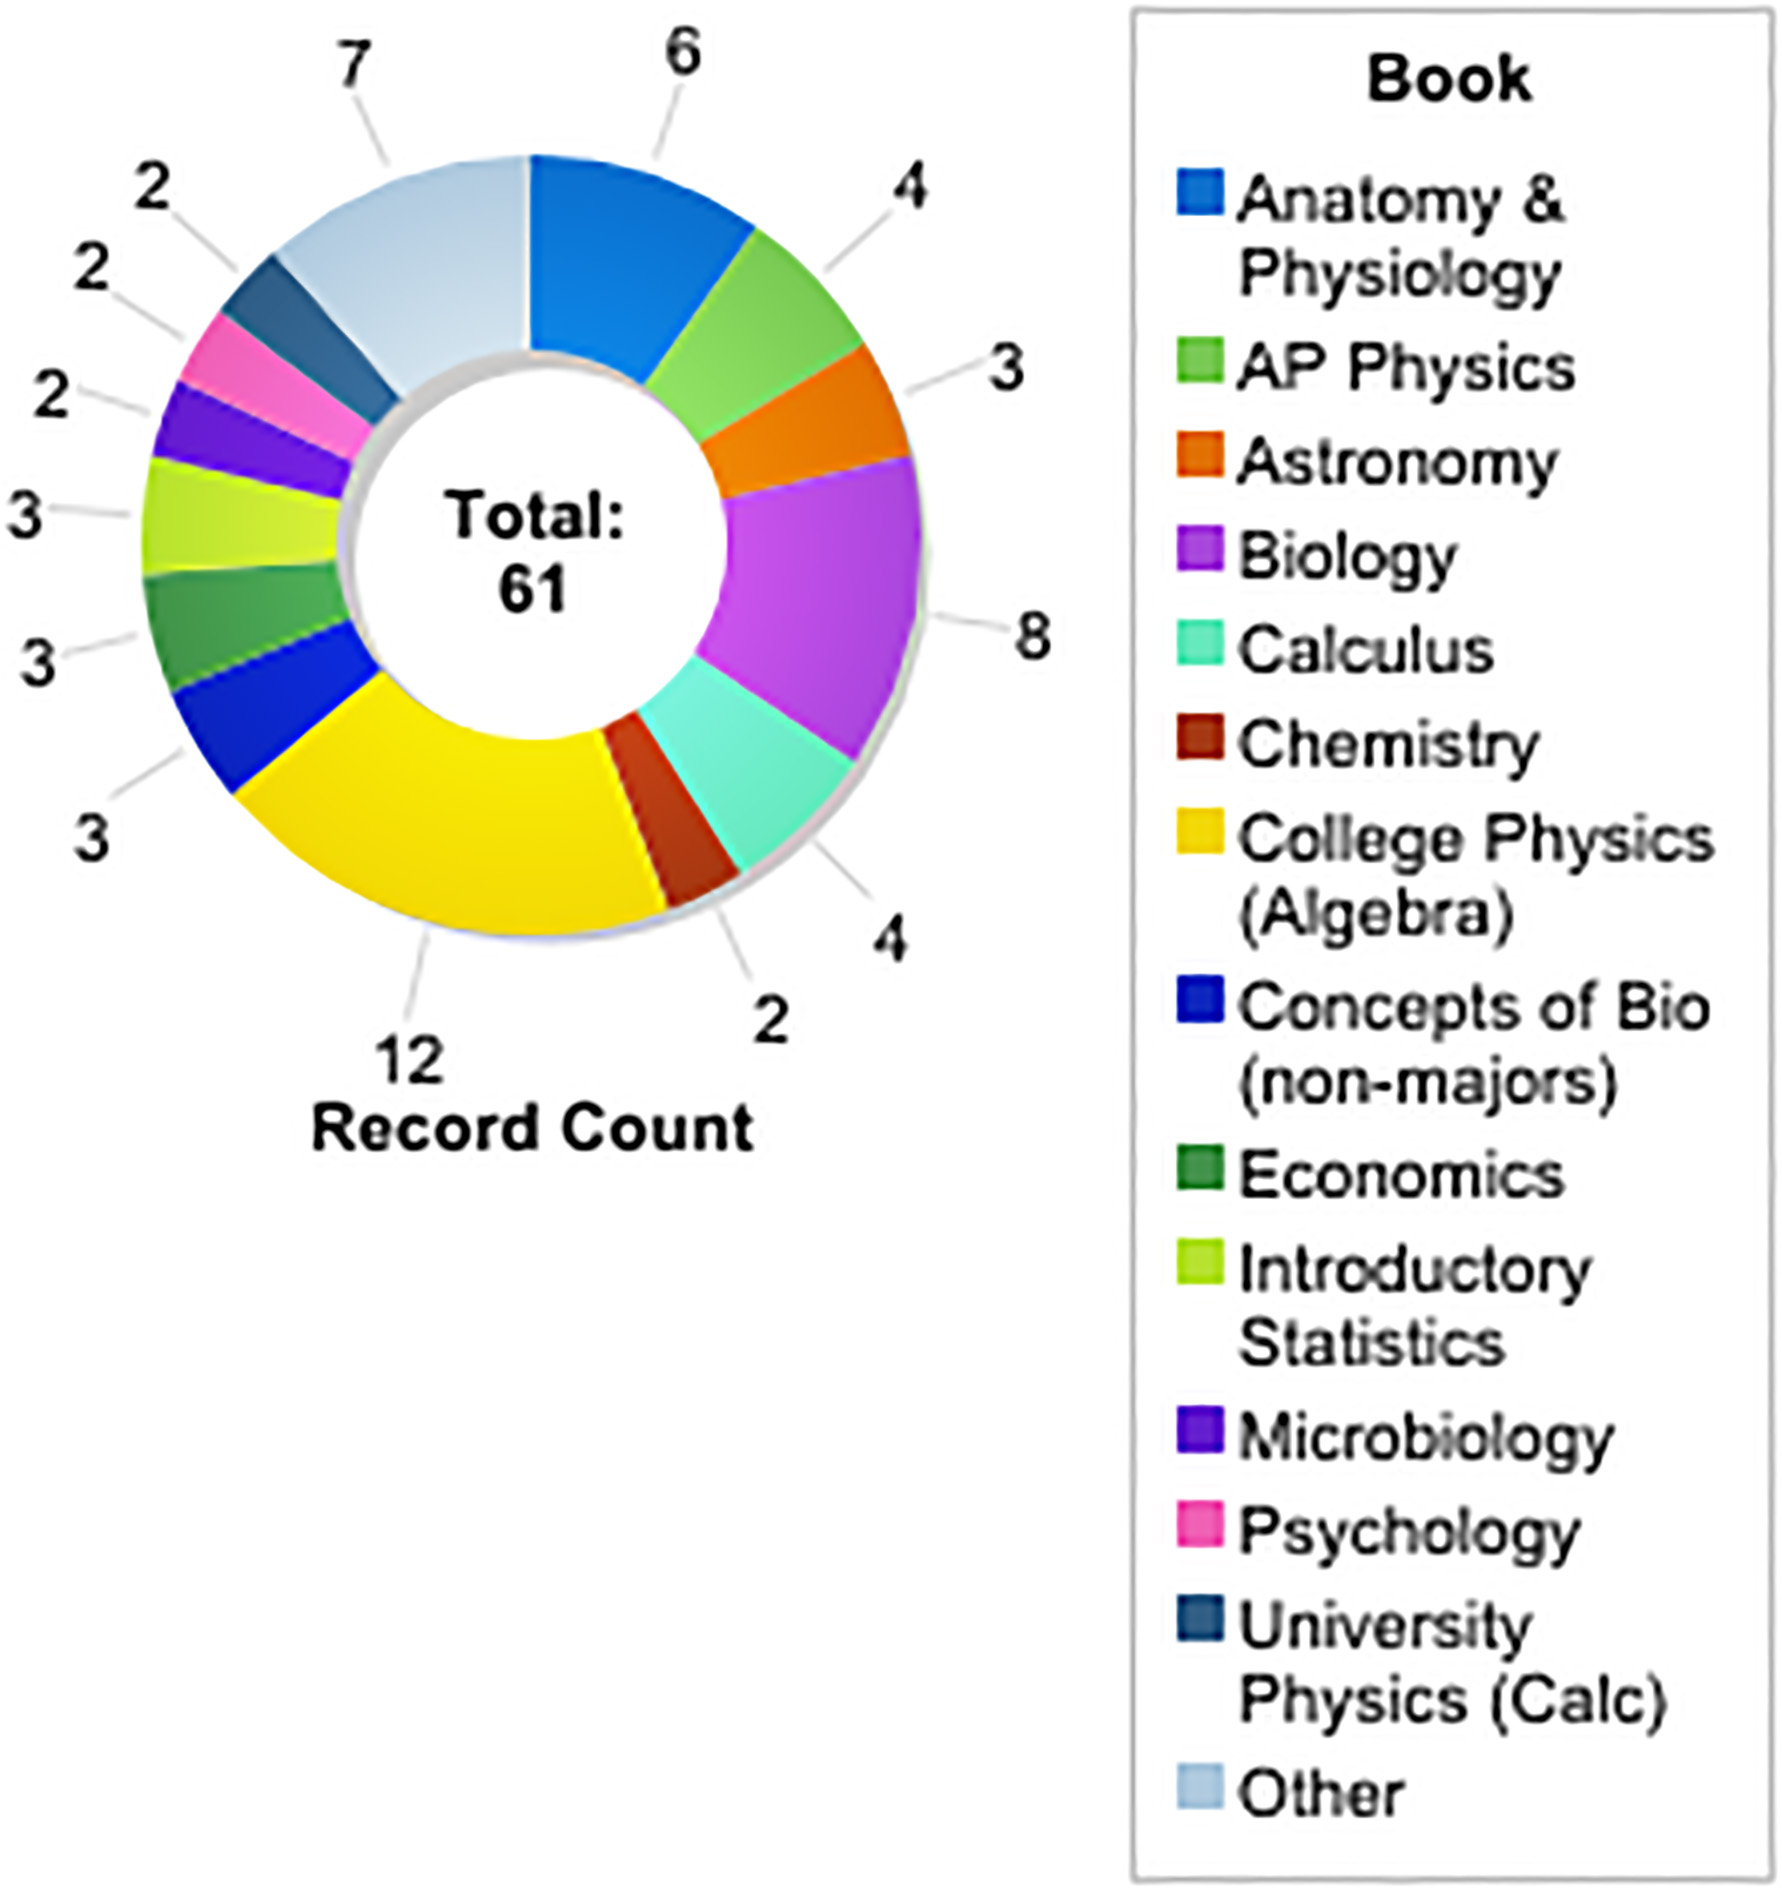 OpenStax UK science textbook adoptions (by subject).